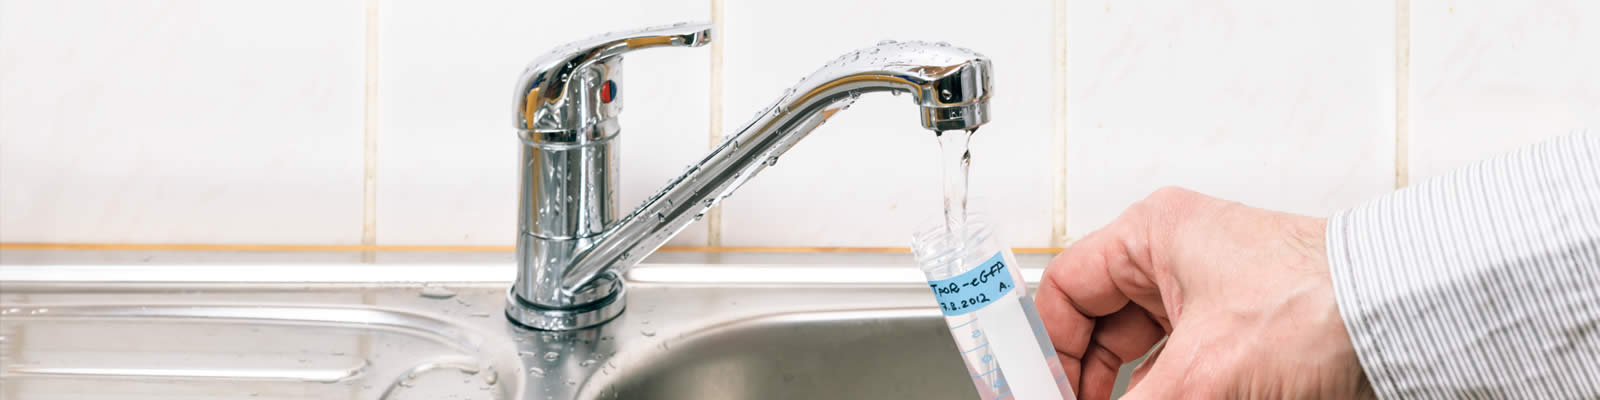 Legionella Guidance for Your Business | Griffiths & Armour